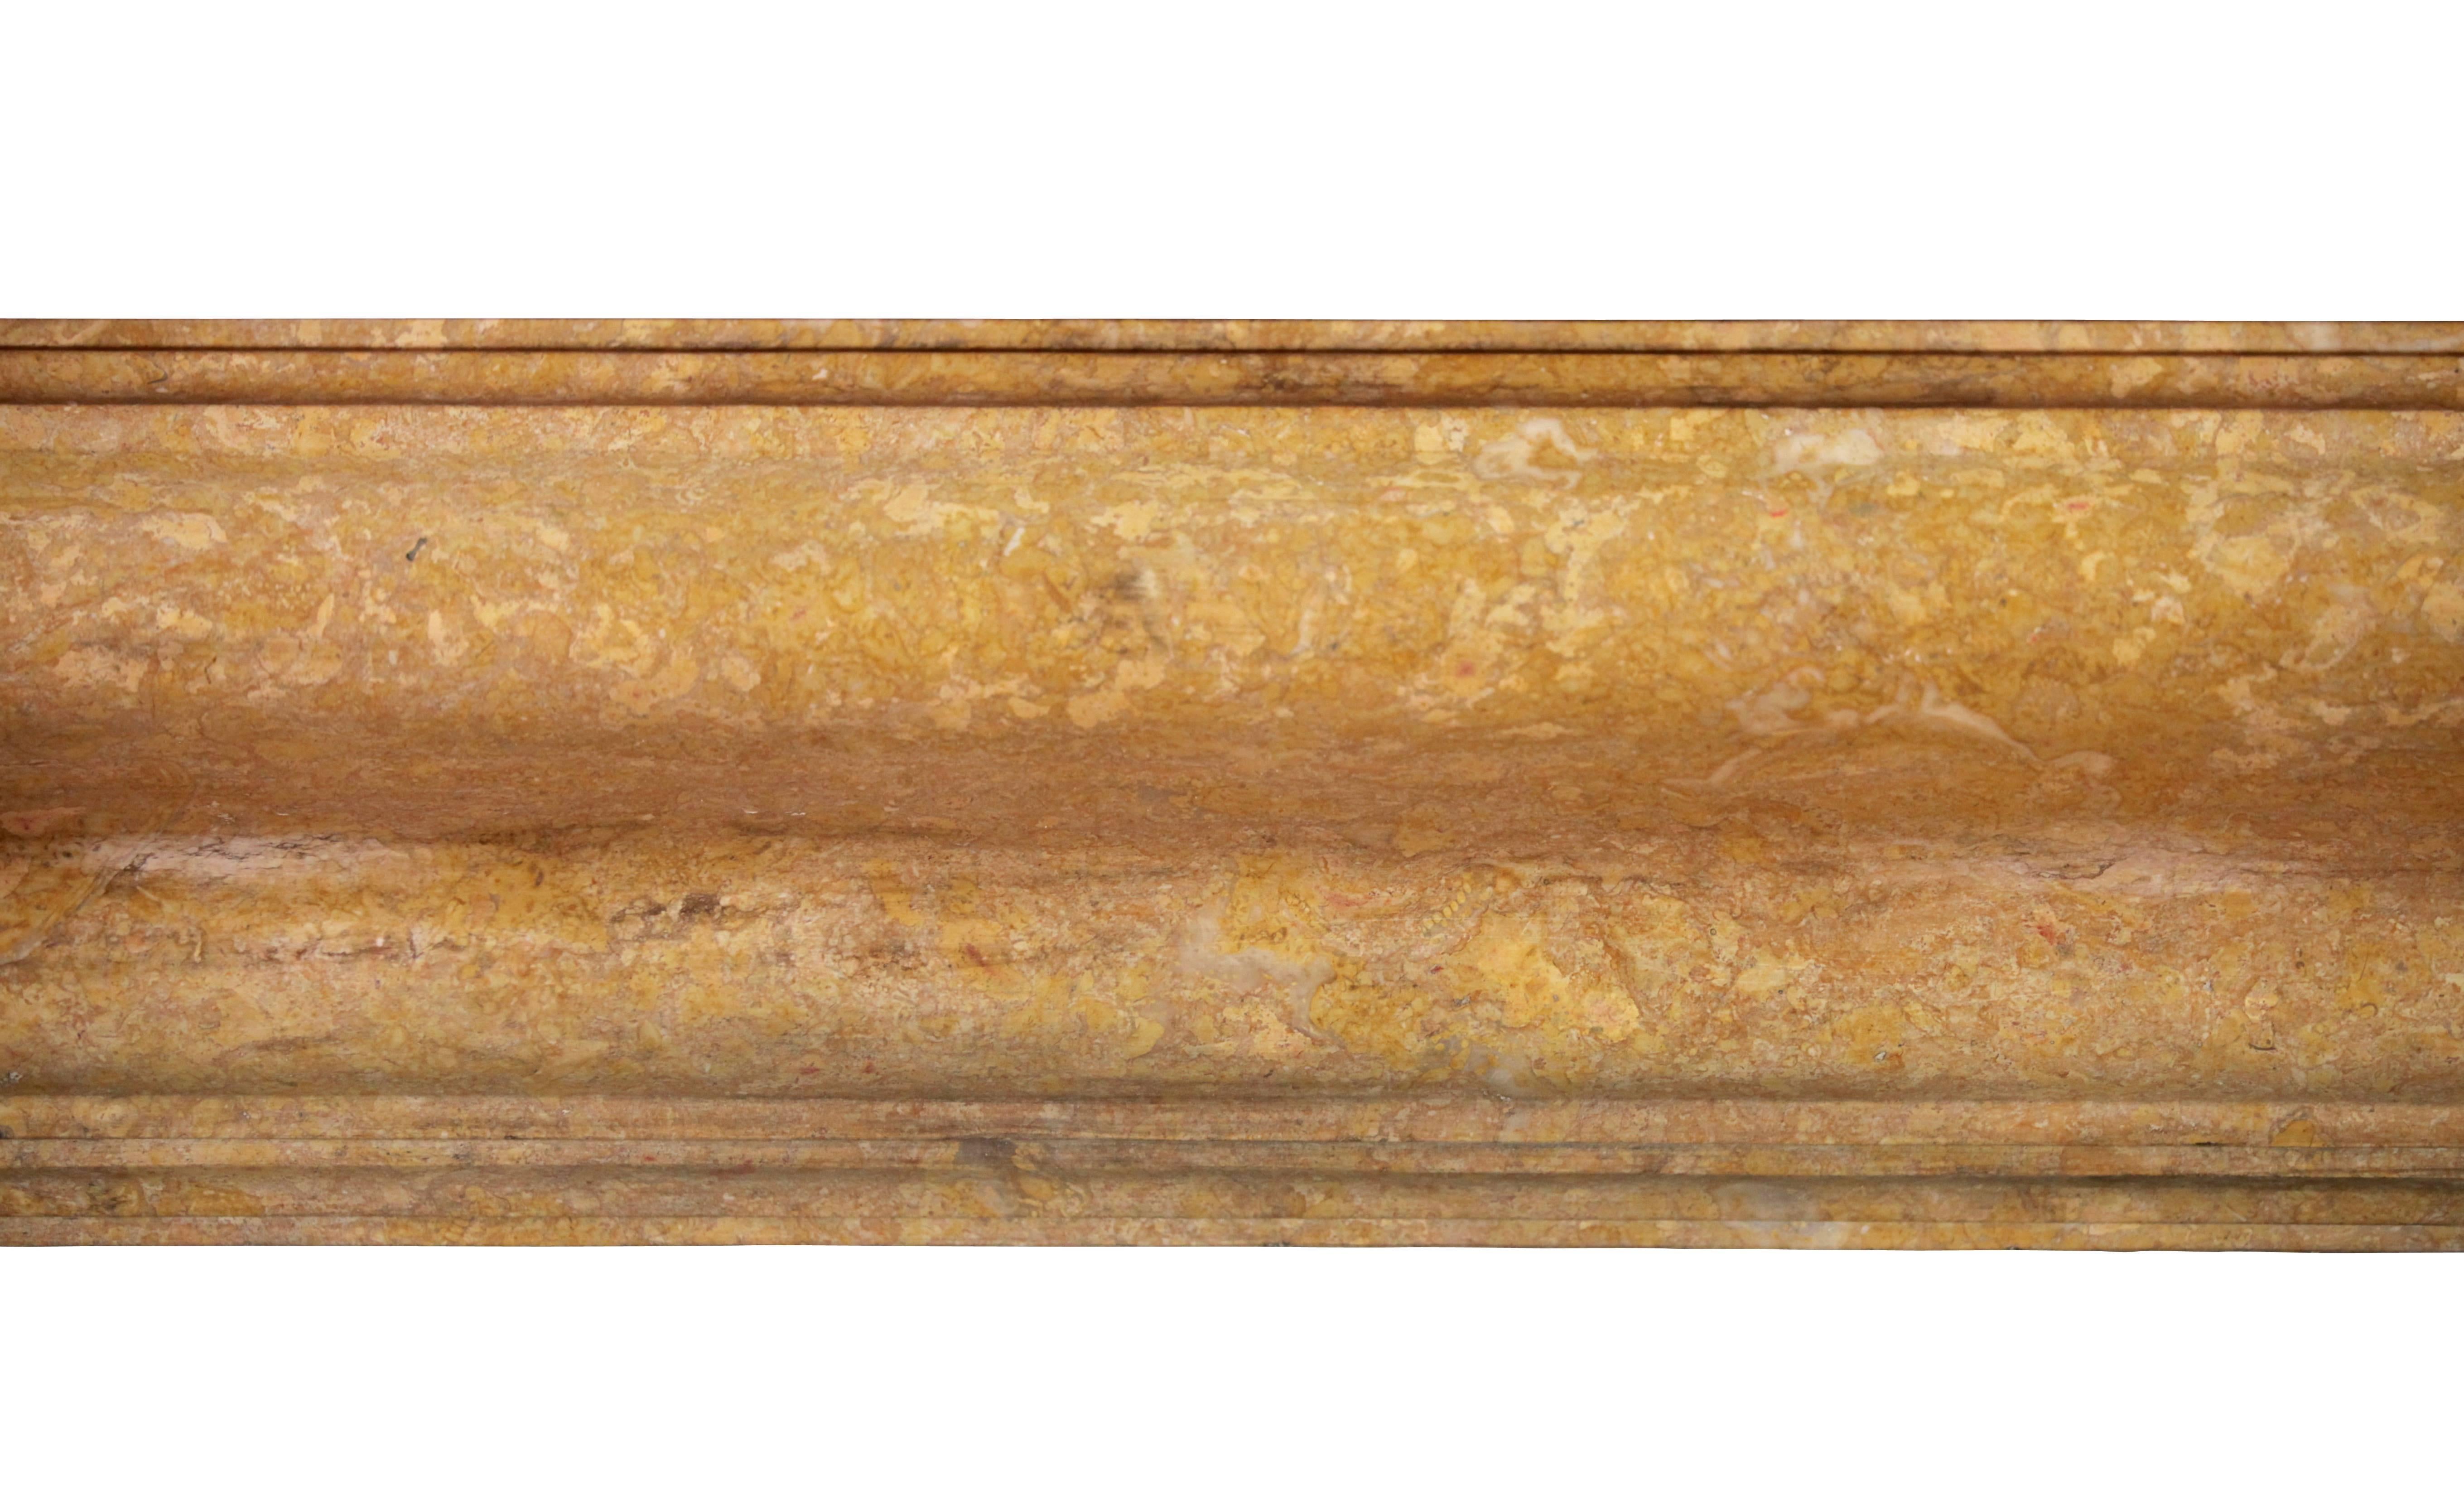 A wide bolection antique fireplace surround in Italian marble with some patina. The irregularity of the carvers hand gives it an extra twist.

Measures;
184 cm EW 72,44".
117 cm EH 46,06".
134 cm IW 52,75".
92 cm IH